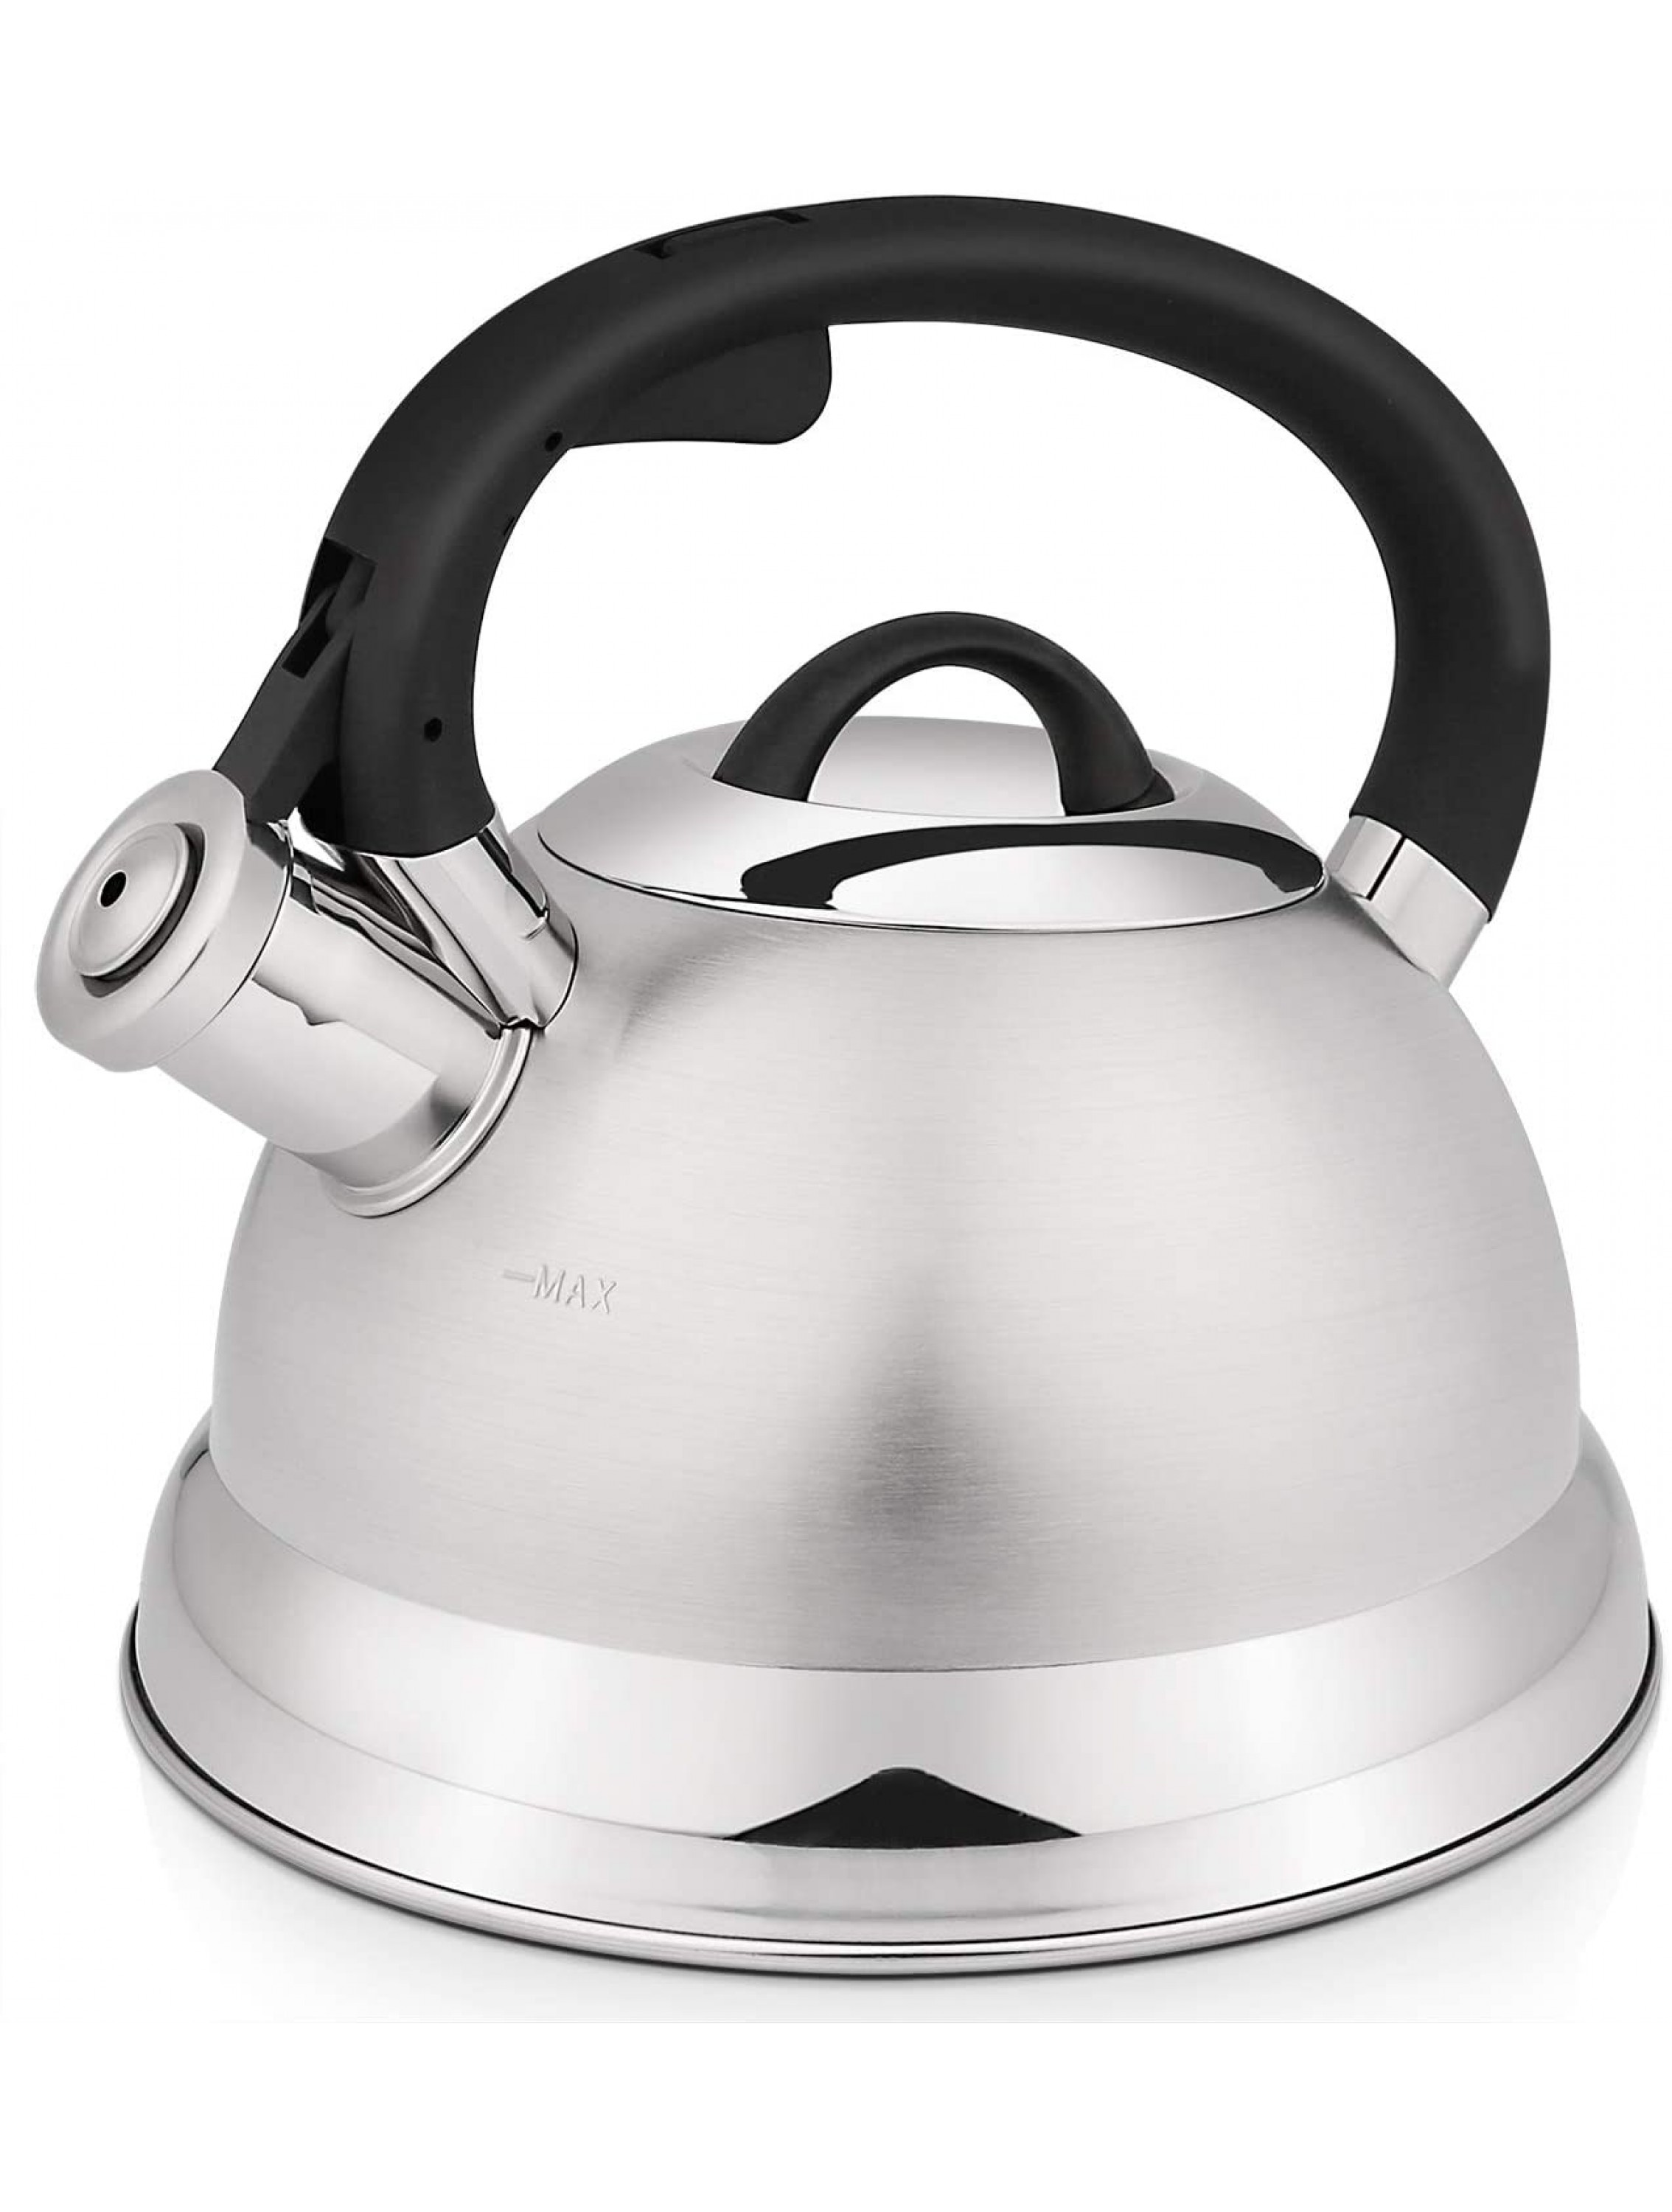 VICALINA Tea Kettle 2.4 Quart Whistling Tea Kettle for Stove top Stainless Steel Teapot with One-Touch Switch Button,Metallic Polishing-Silver - BKXDAIXAB